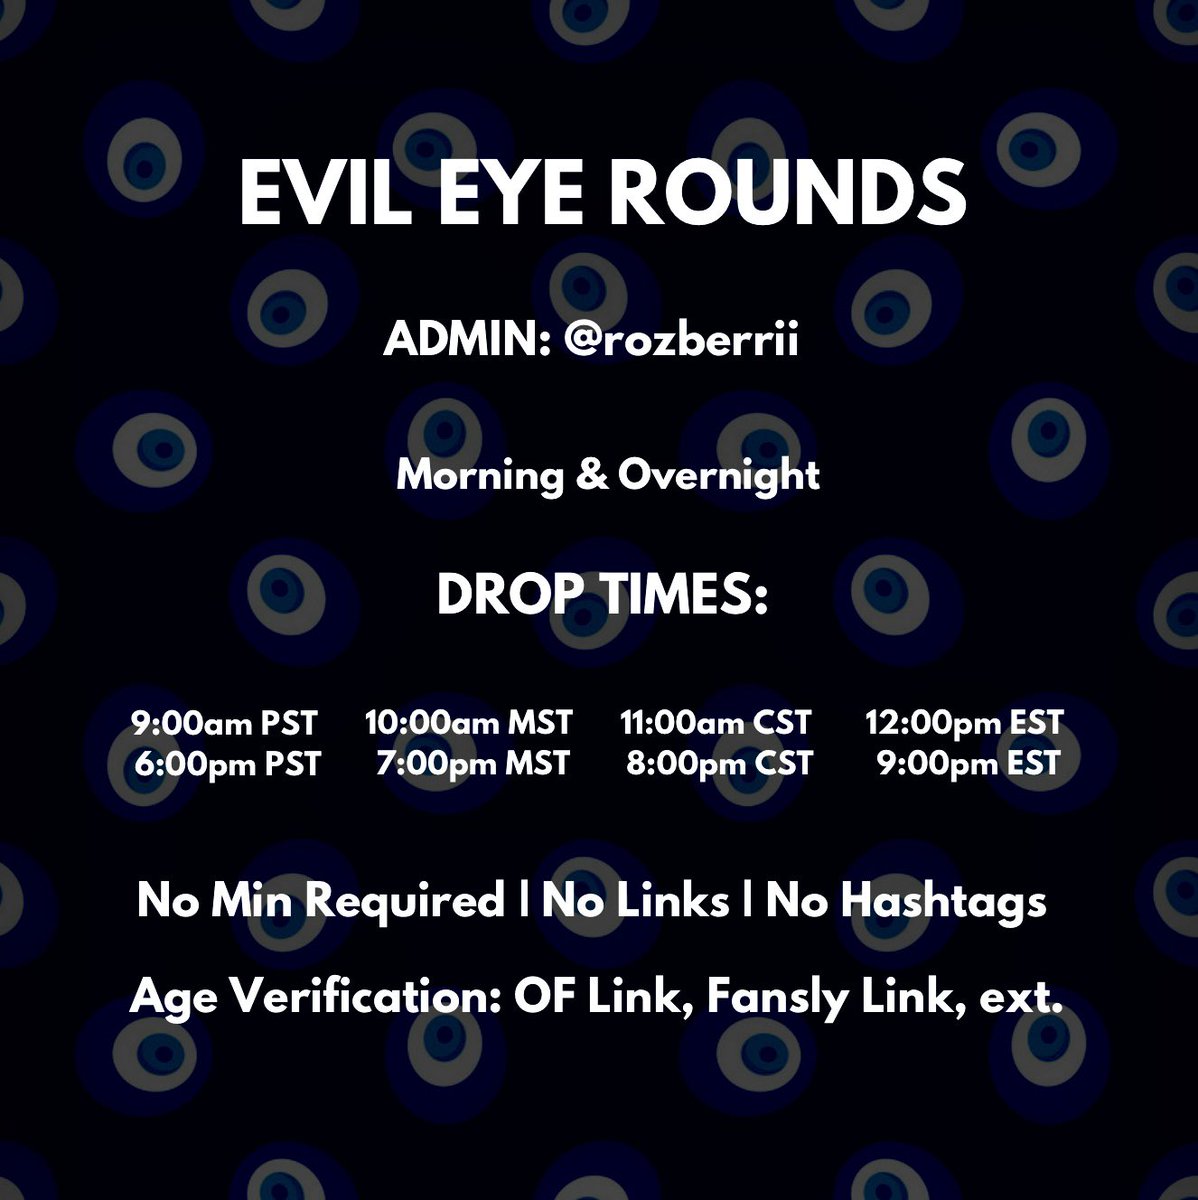 🖤 EVIL EYE ROUNDS 🖤 Comment if you would like to join! MUST HAVE VERIFIED LINK IN BIO.